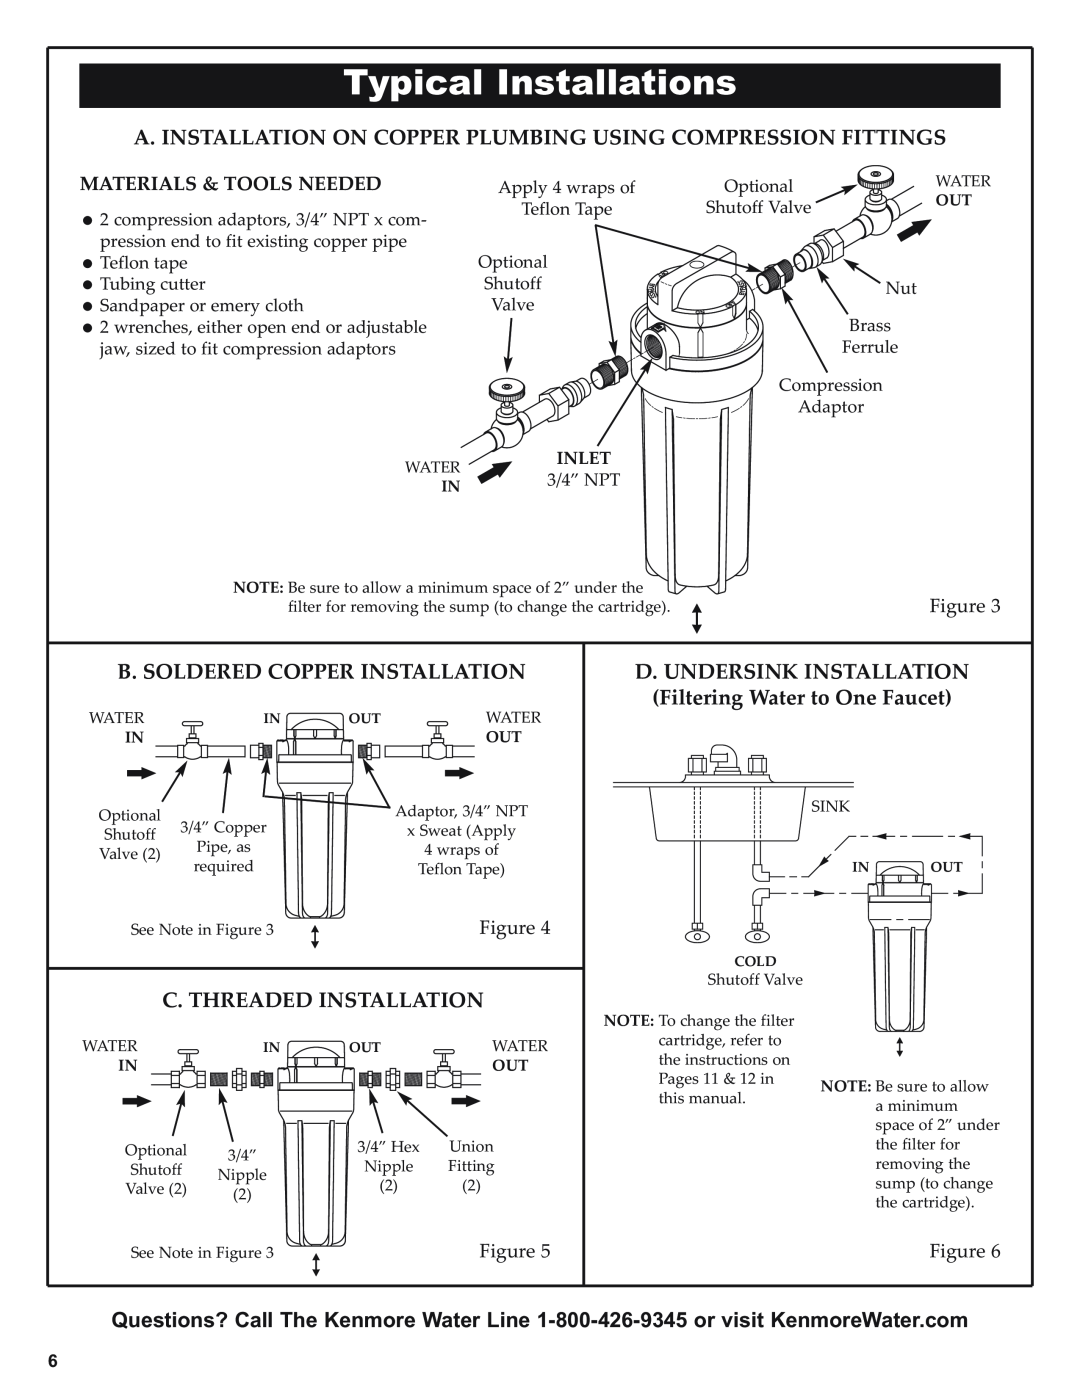 Kenmore 625.38445 owner manual Typical Installations, A. Installation On Copper Plumbing Using Compression Fittings 